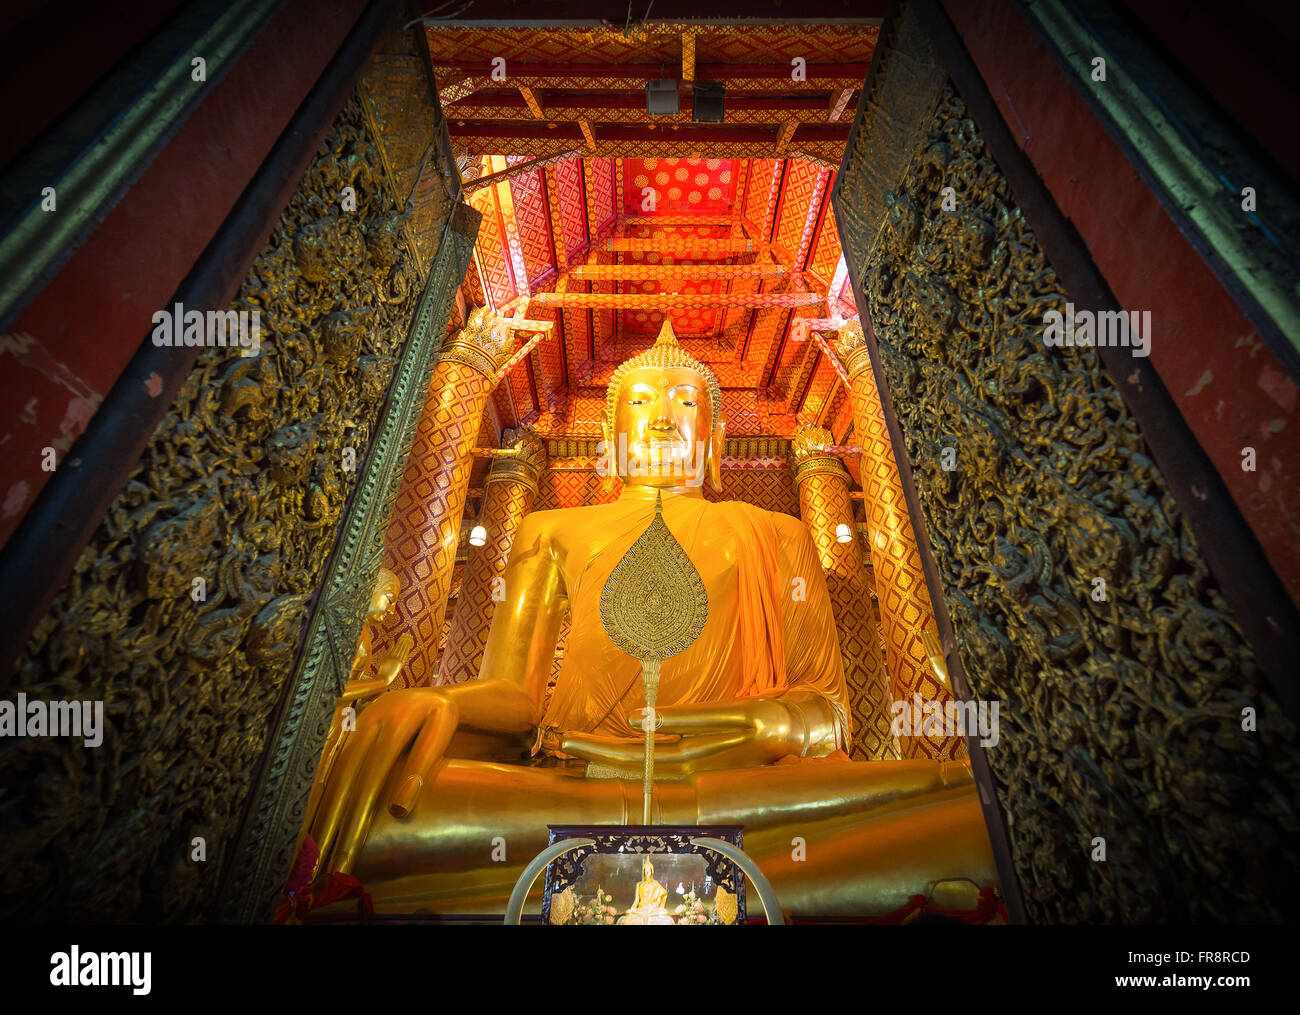 The gate open into the big gold buddha statue called Luang Pho To in chapel of Wat Phanan Choeng in Ayutthaya, Thailand. Stock Photo